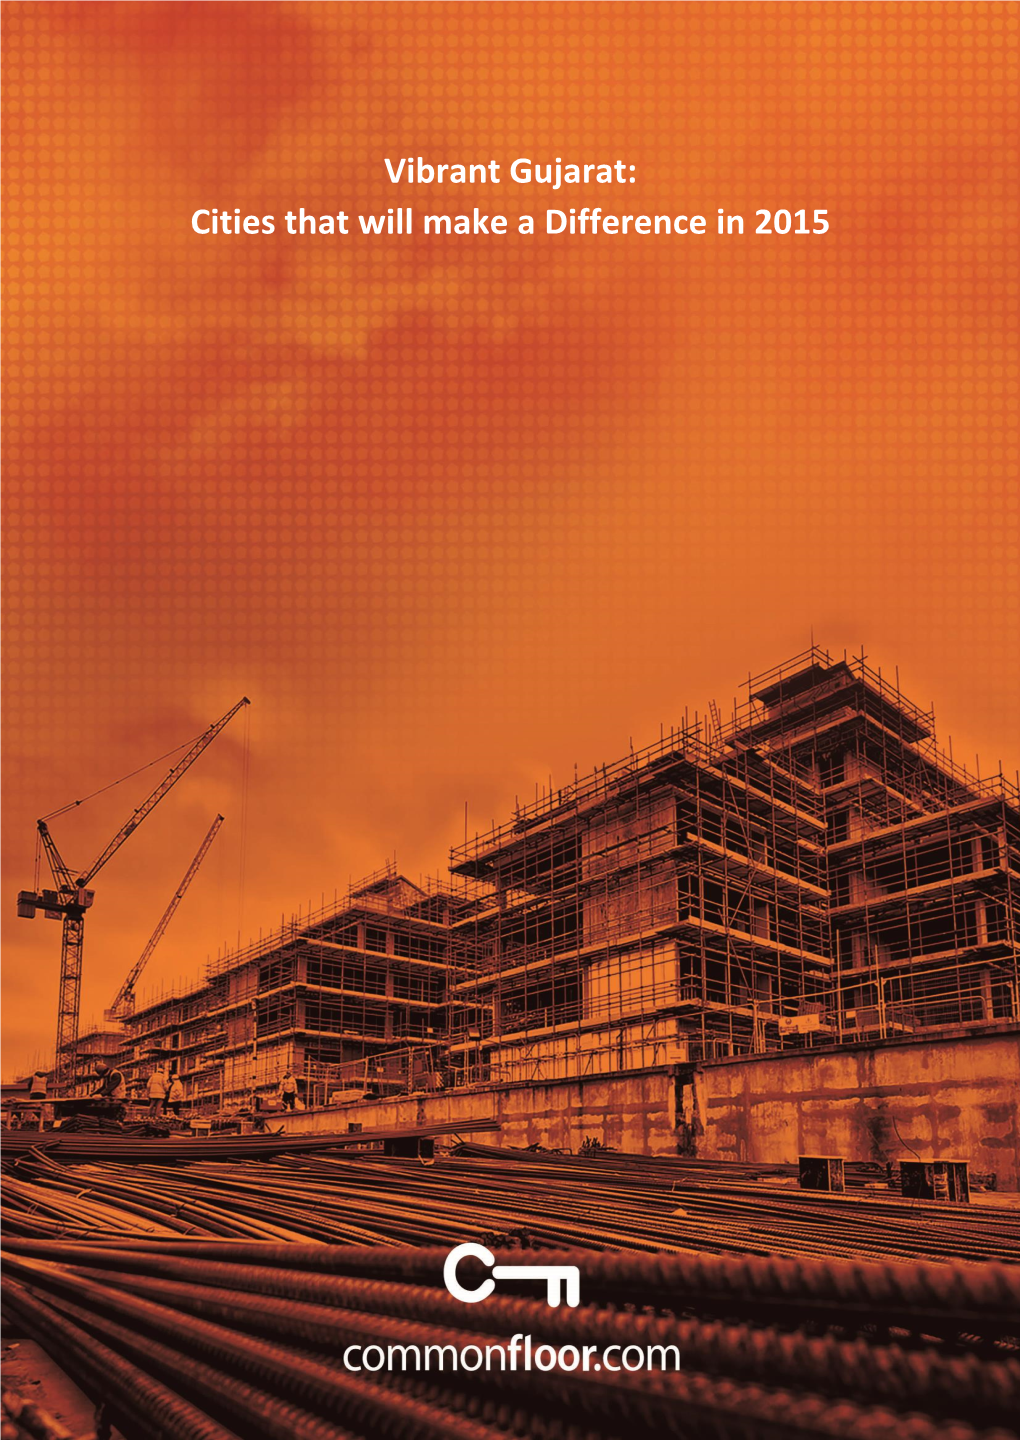 Vibrant Gujarat: Cities That Will Make a Difference in 2015